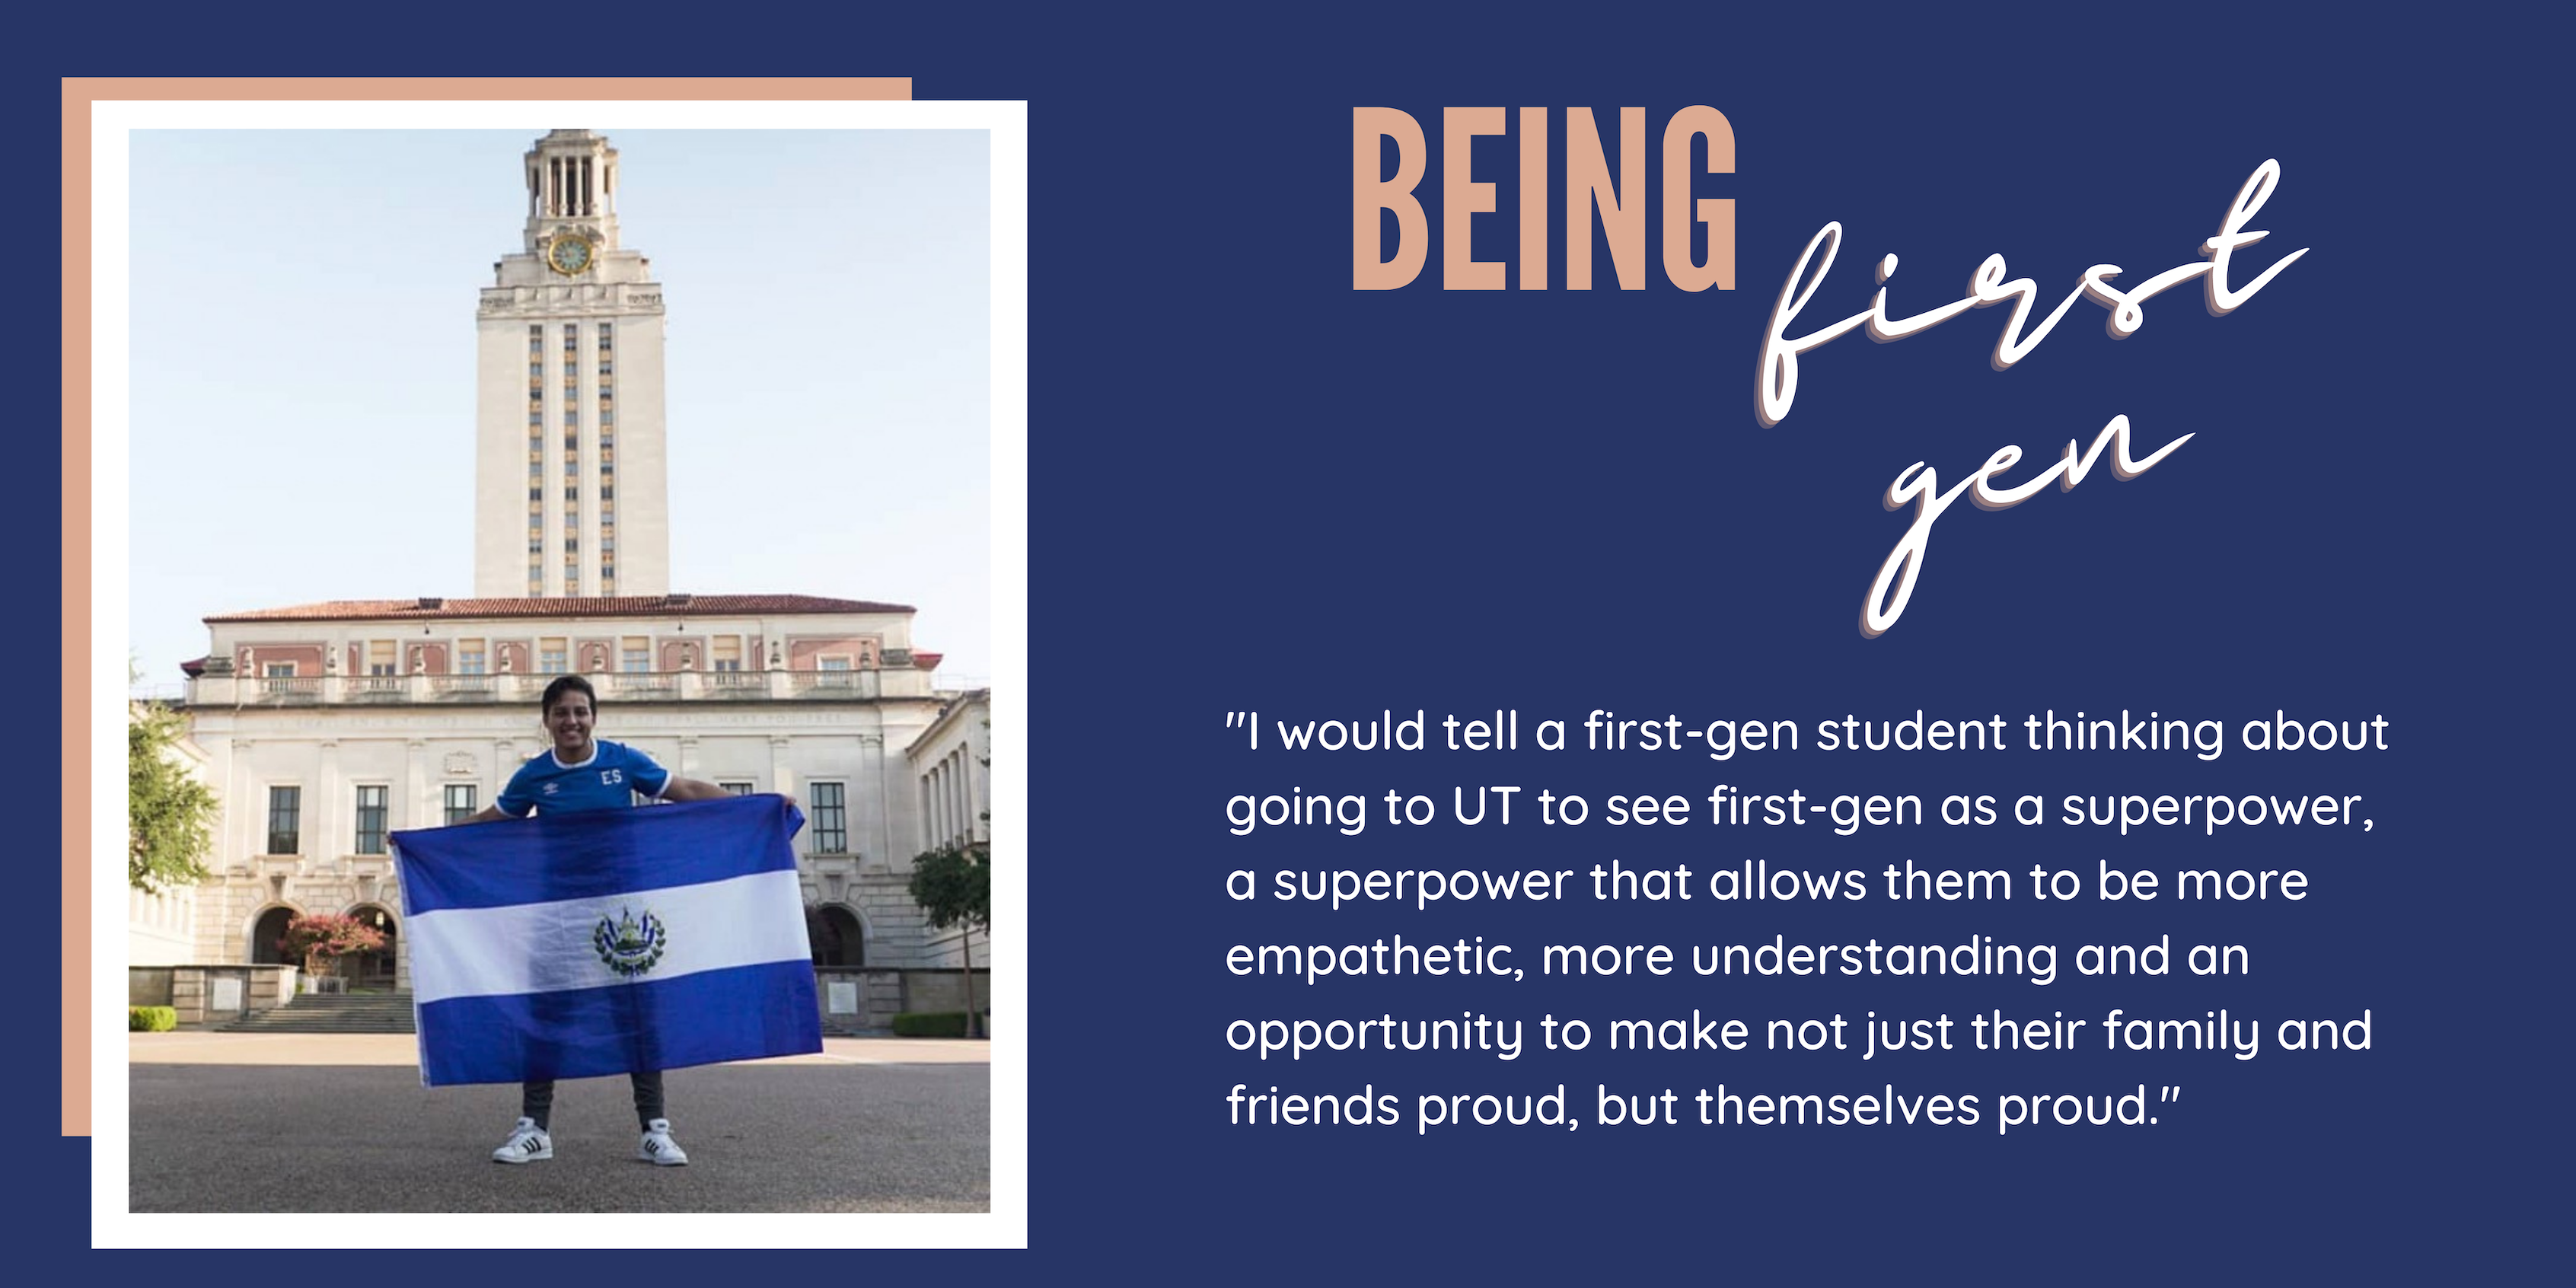 Blue background. On the left is a photo of Jose Martinez standing in front of the UT Austin tower holding a flag. On the right is "Being First Gen" at the top with white text beneath it that says, "I would tell a first-gen student thinking about going to UT to see first-gen as a superpower, a superpower that allows them to be more empathetic, more understanding and an opportunity to make not just their family and friends proud, but themselves proud."